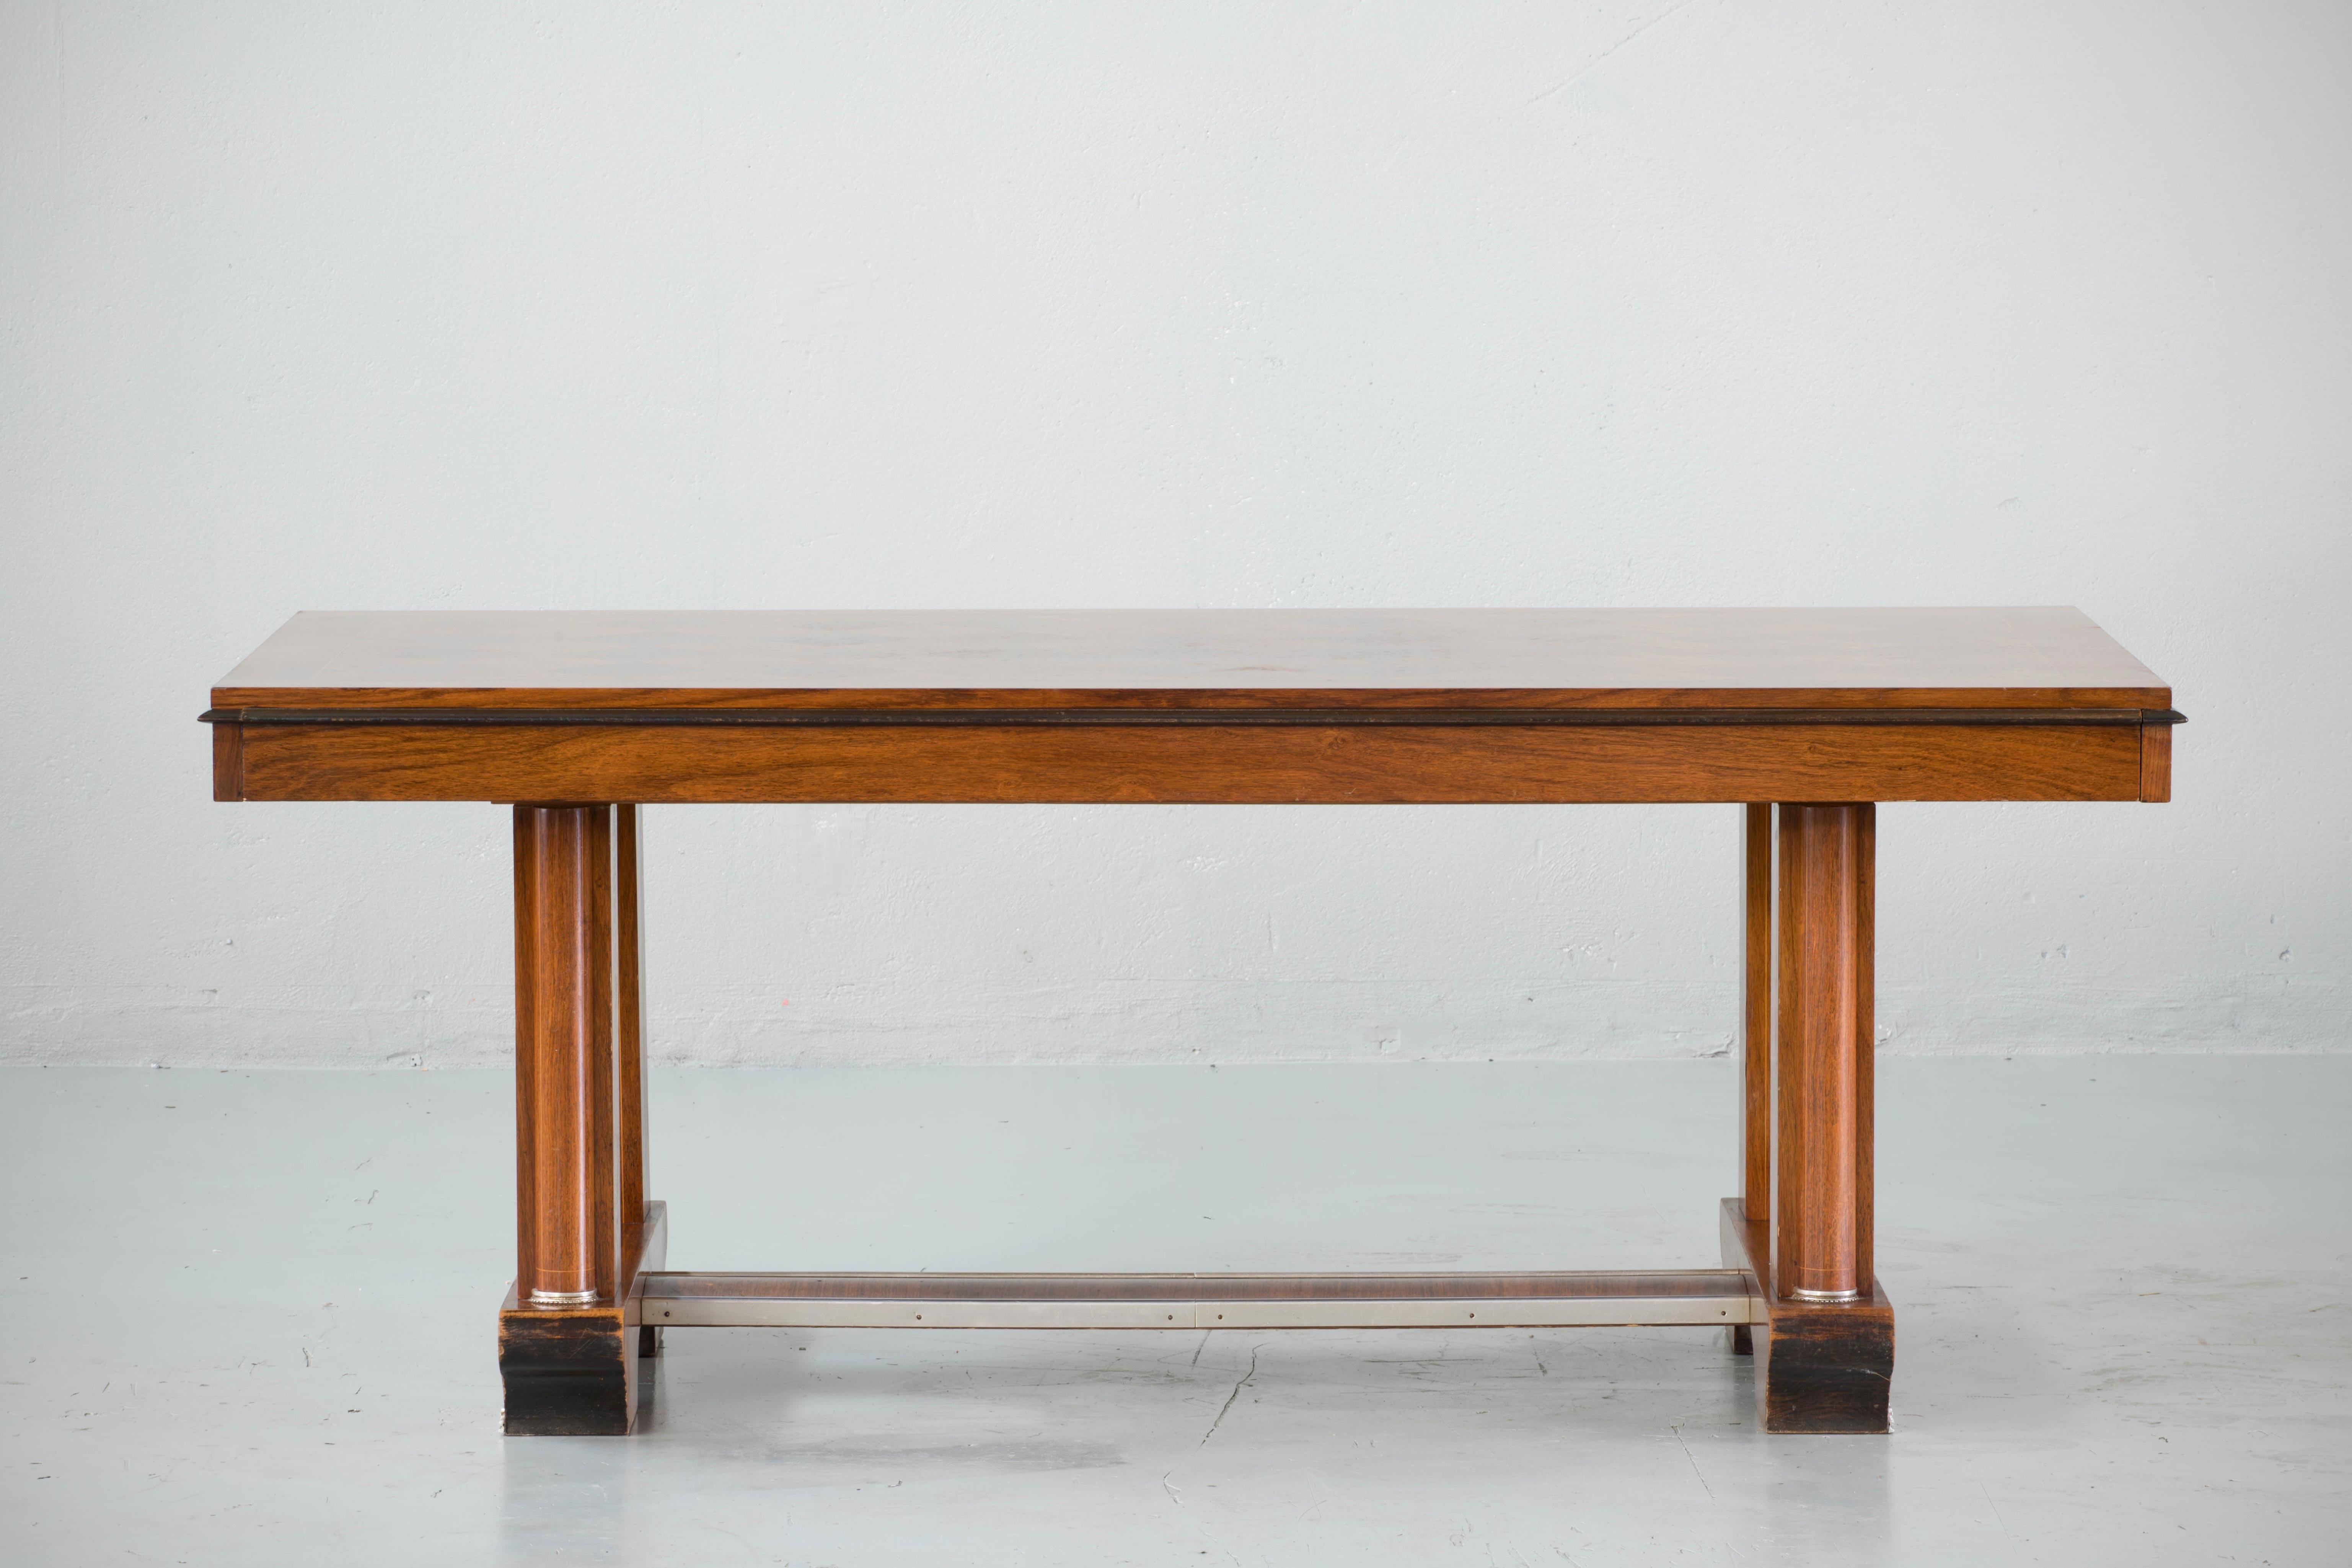 French Art Deco dining table or library table, circa 1940s. It is a versatile size and can be used as a dining table, library table, or large scale partners desk or bureau plat.
The table can be extended from each side, the extensions are 33 cm